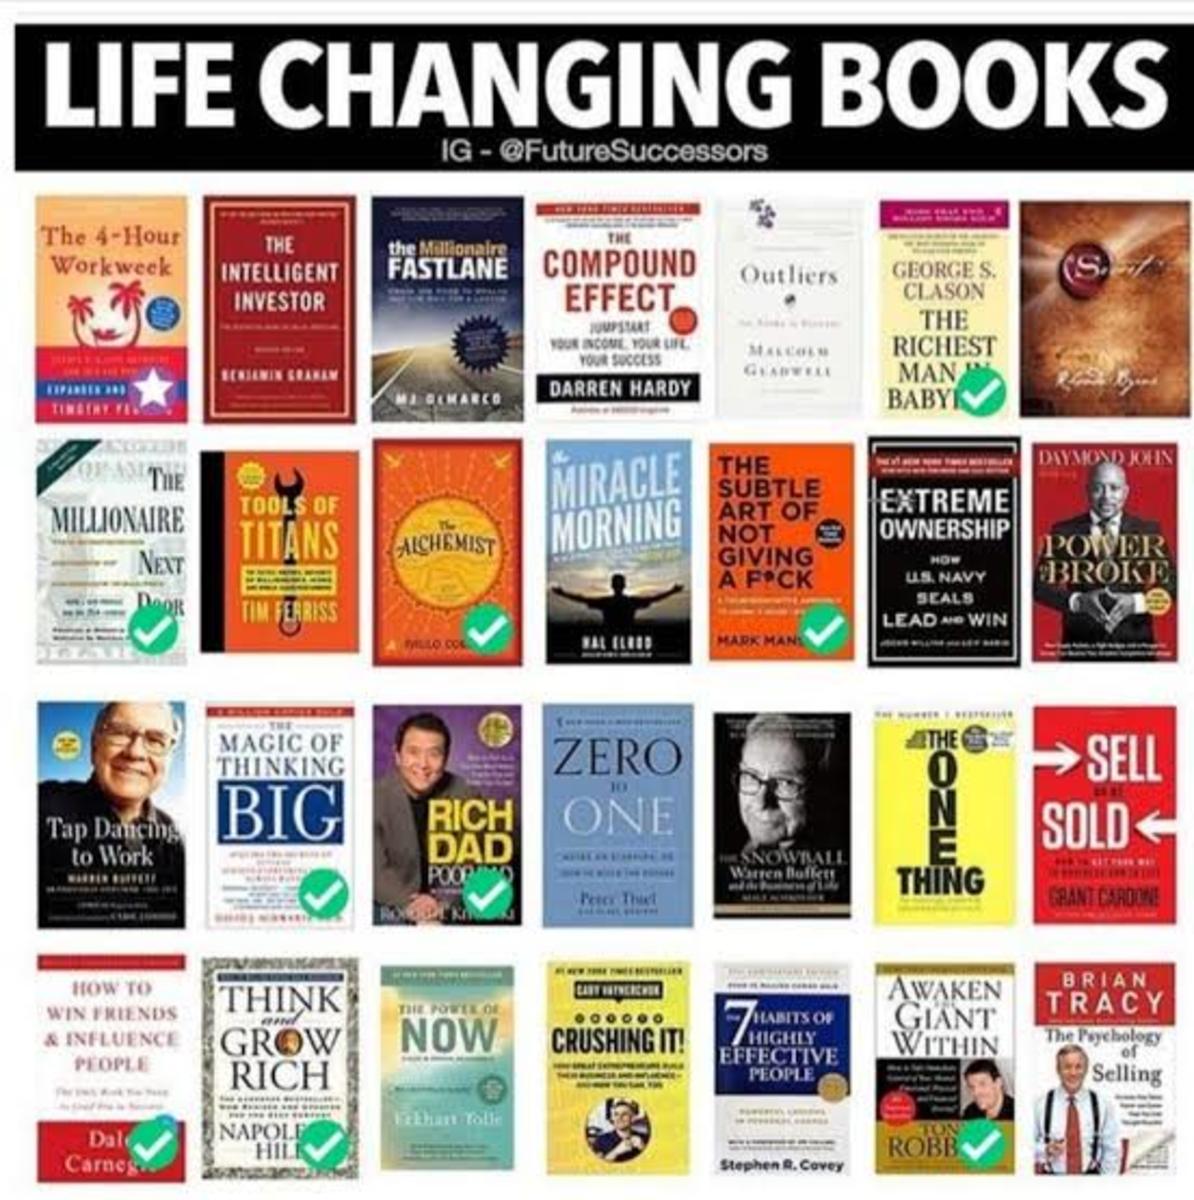 3-most-life-changing-books-everyone-should-read-at-least-once-in-life